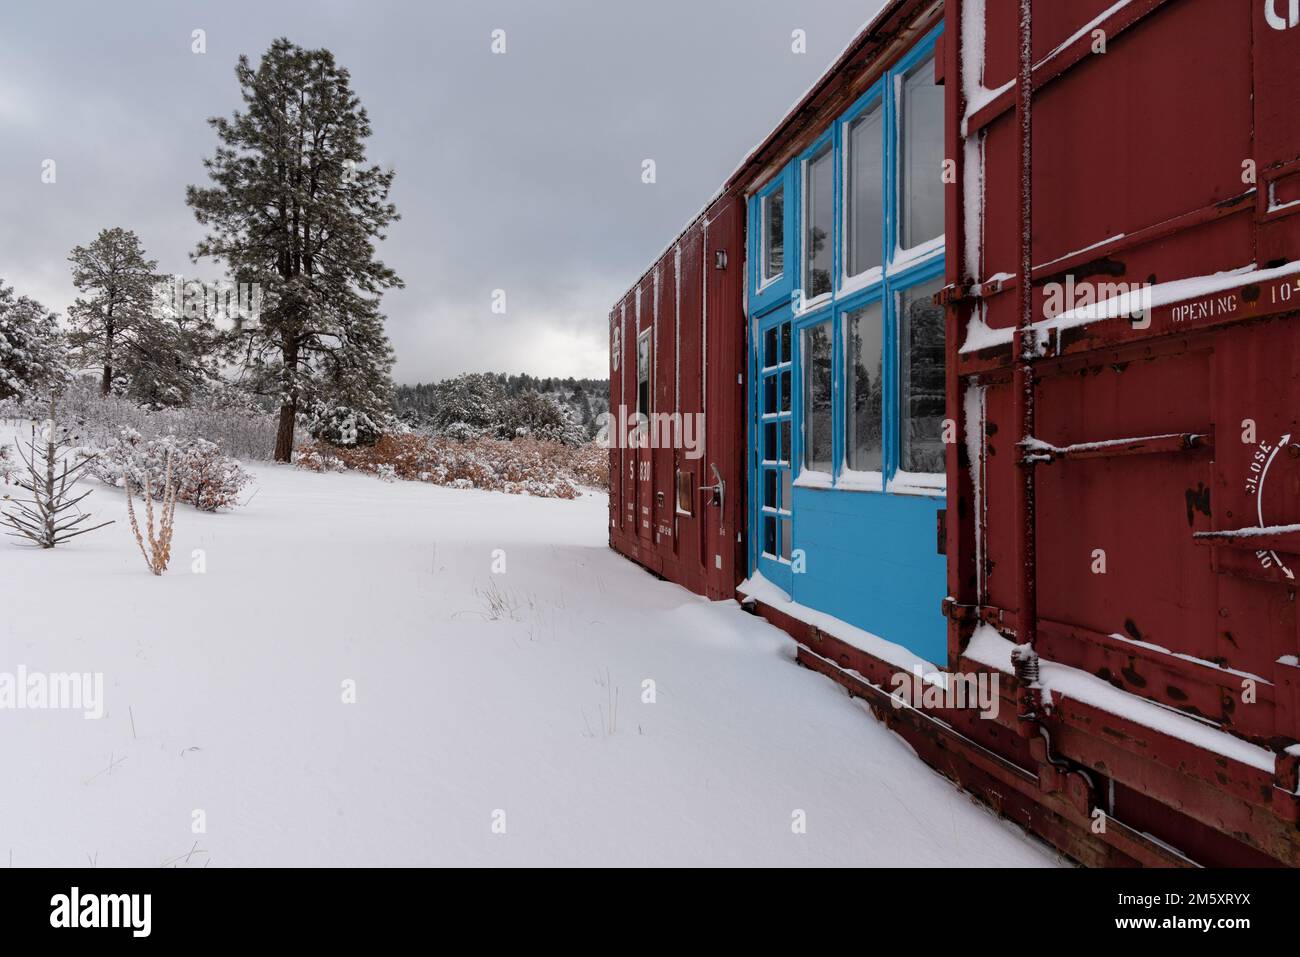 Dark red train car with large windows and doors framed with turquoise-colored doors and windows in a snowy landscape in Northern New Mexico, USA. Stock Photo